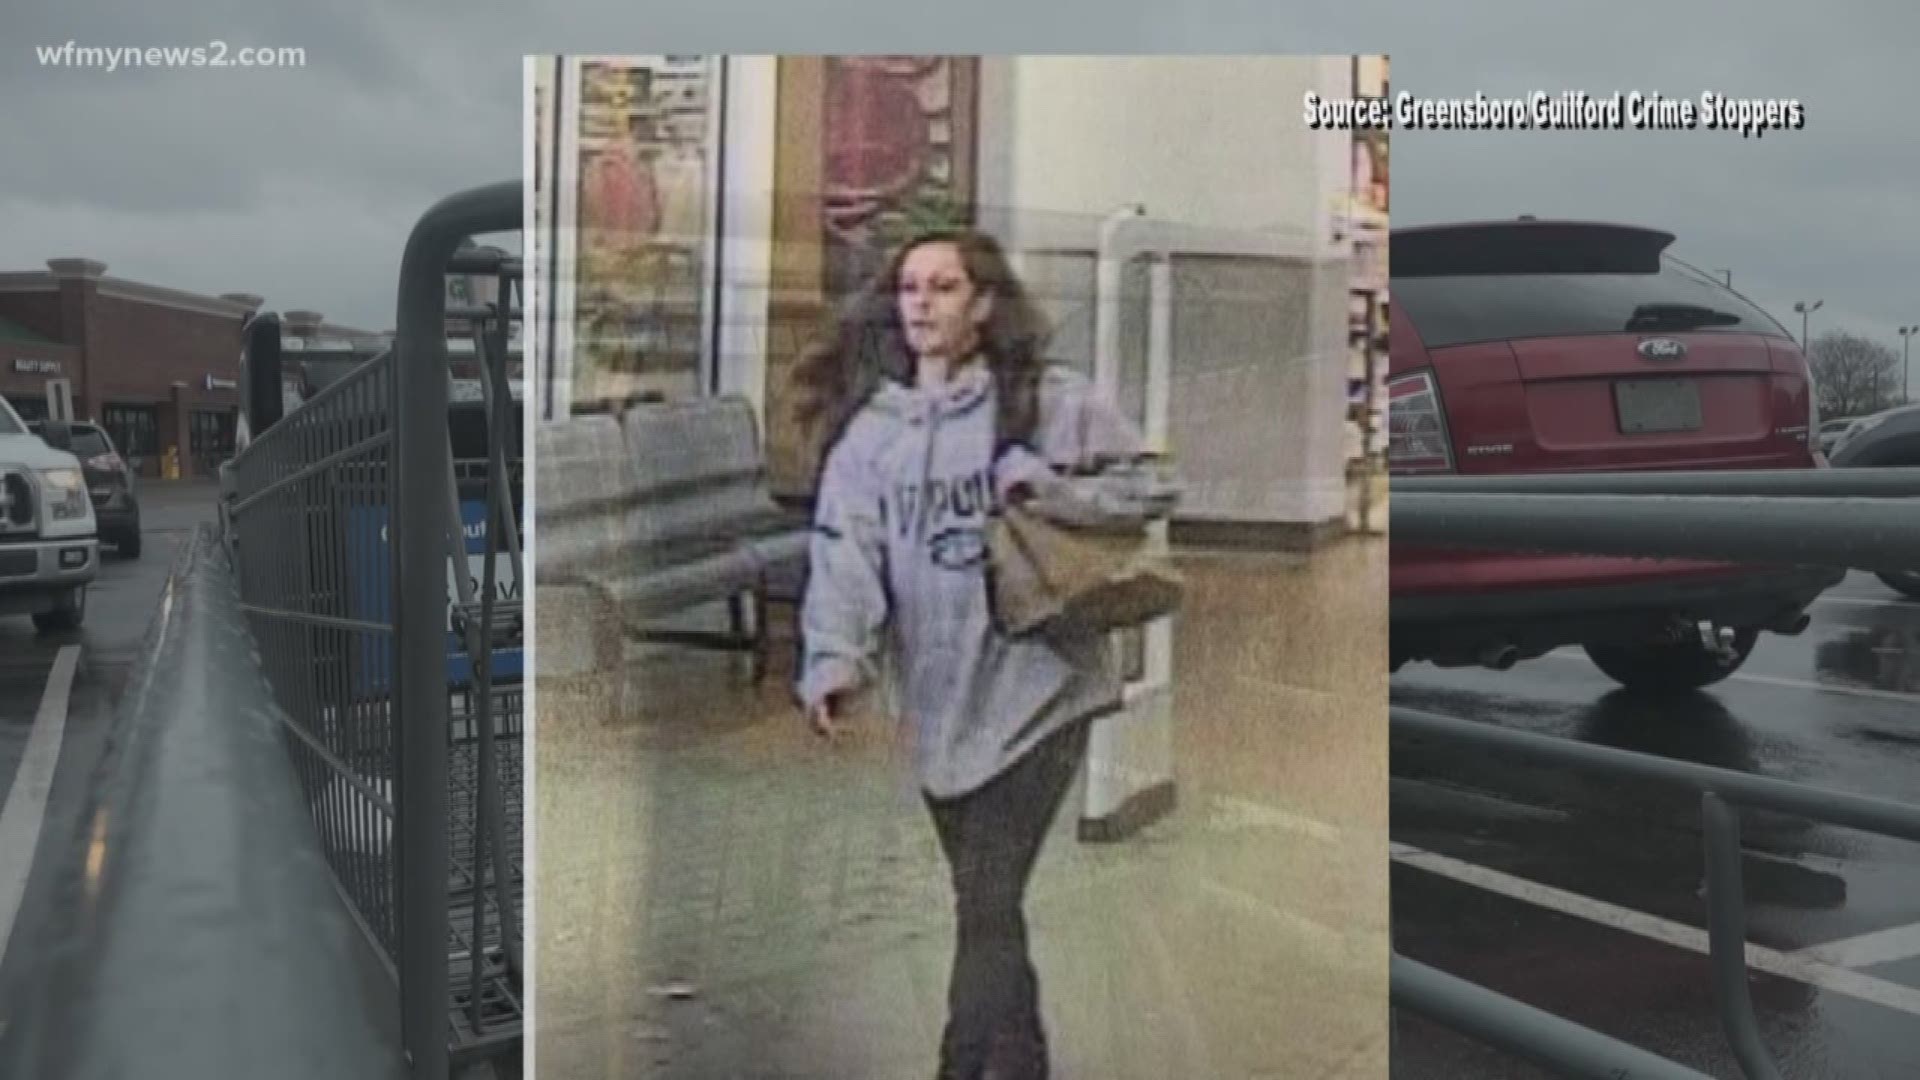 A woman says she was just trying to shop when her purse was snatched.